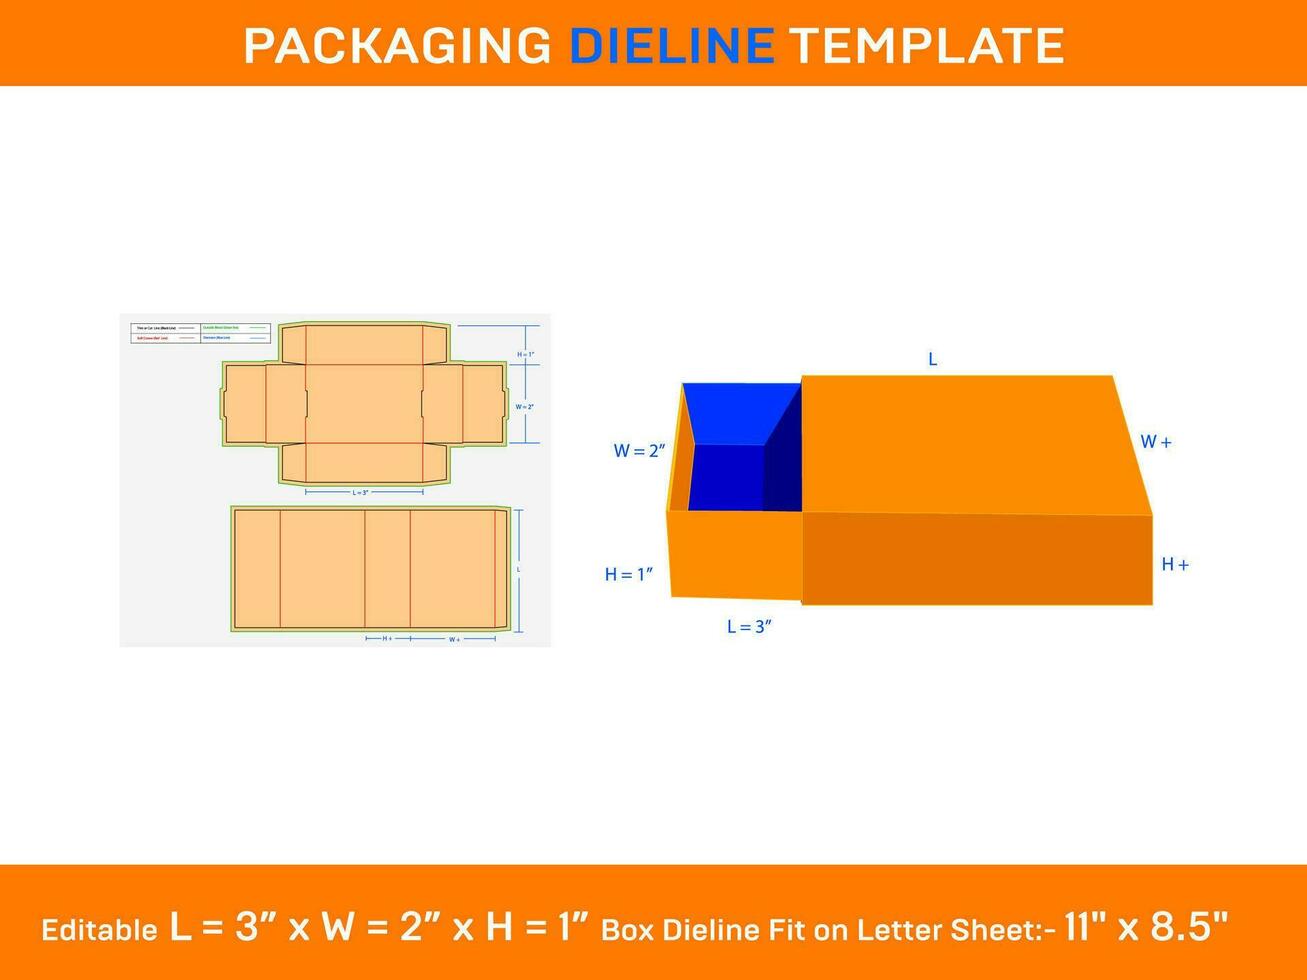 Box Sleeves, Dieline Template, 3 x 2 x 1 inch, SVG, Ai, EPS, PDF, DXF,  JPG, PNG vector